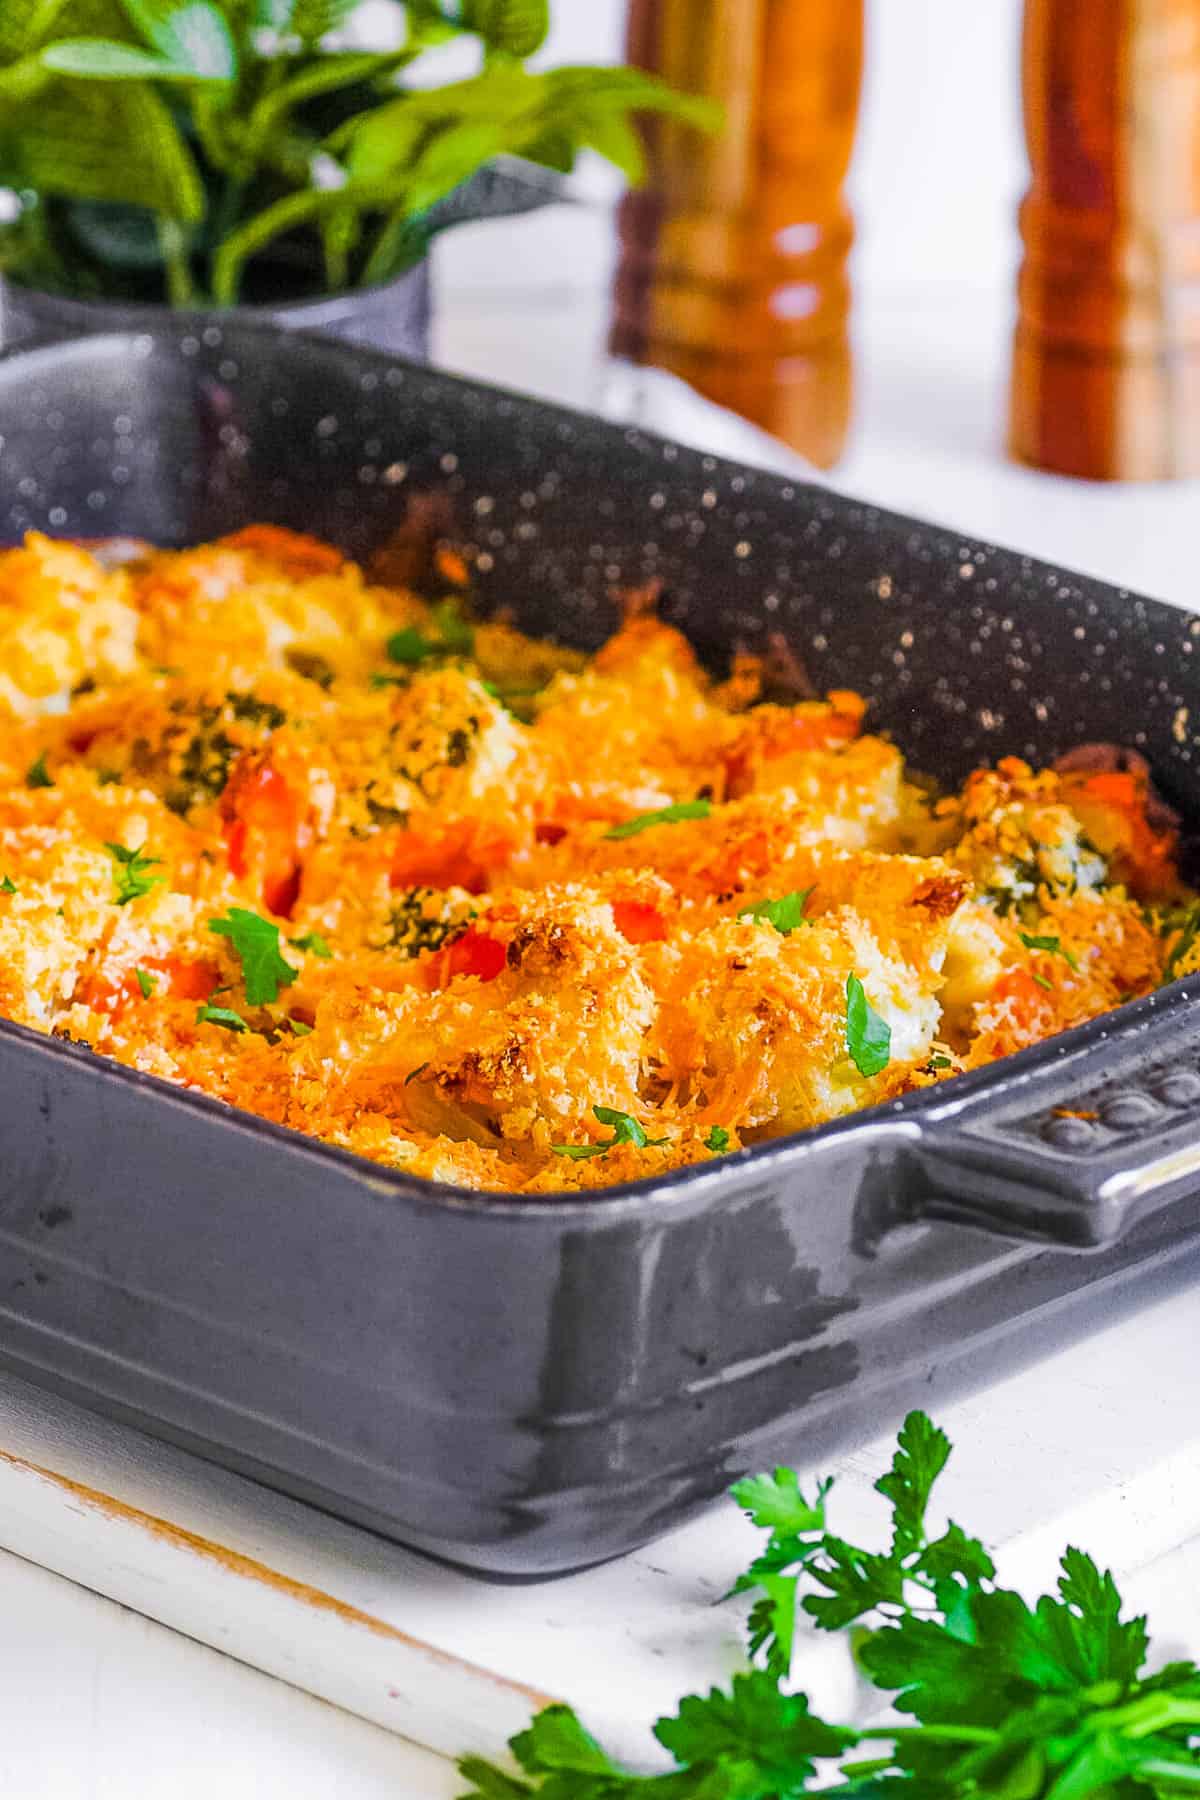 Vegetable au gratin with cheese in a baking dish.